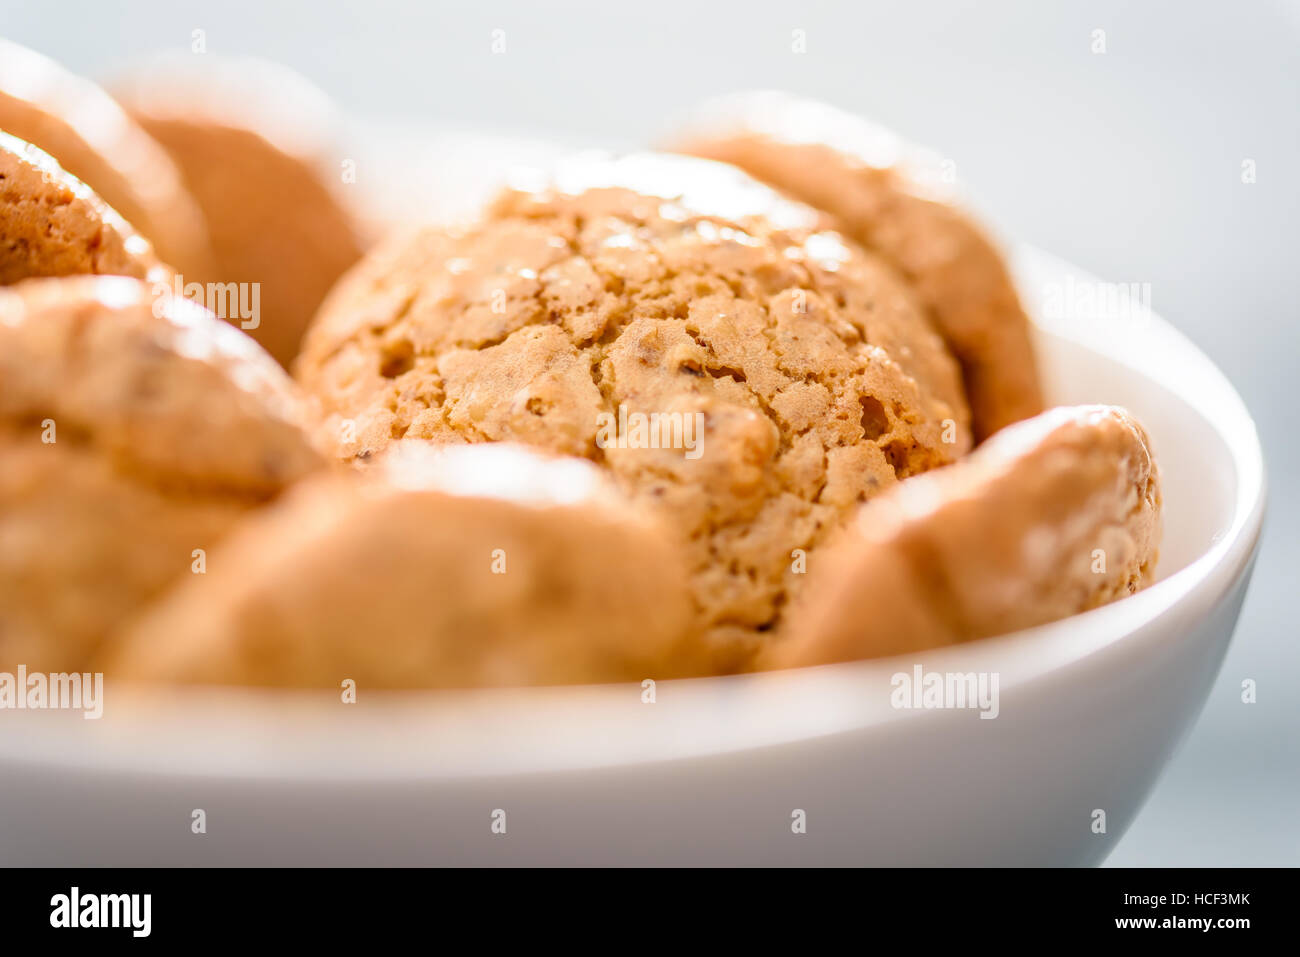 - hi-res Page amaretti Crunchy - and Alamy stock images 3 photography